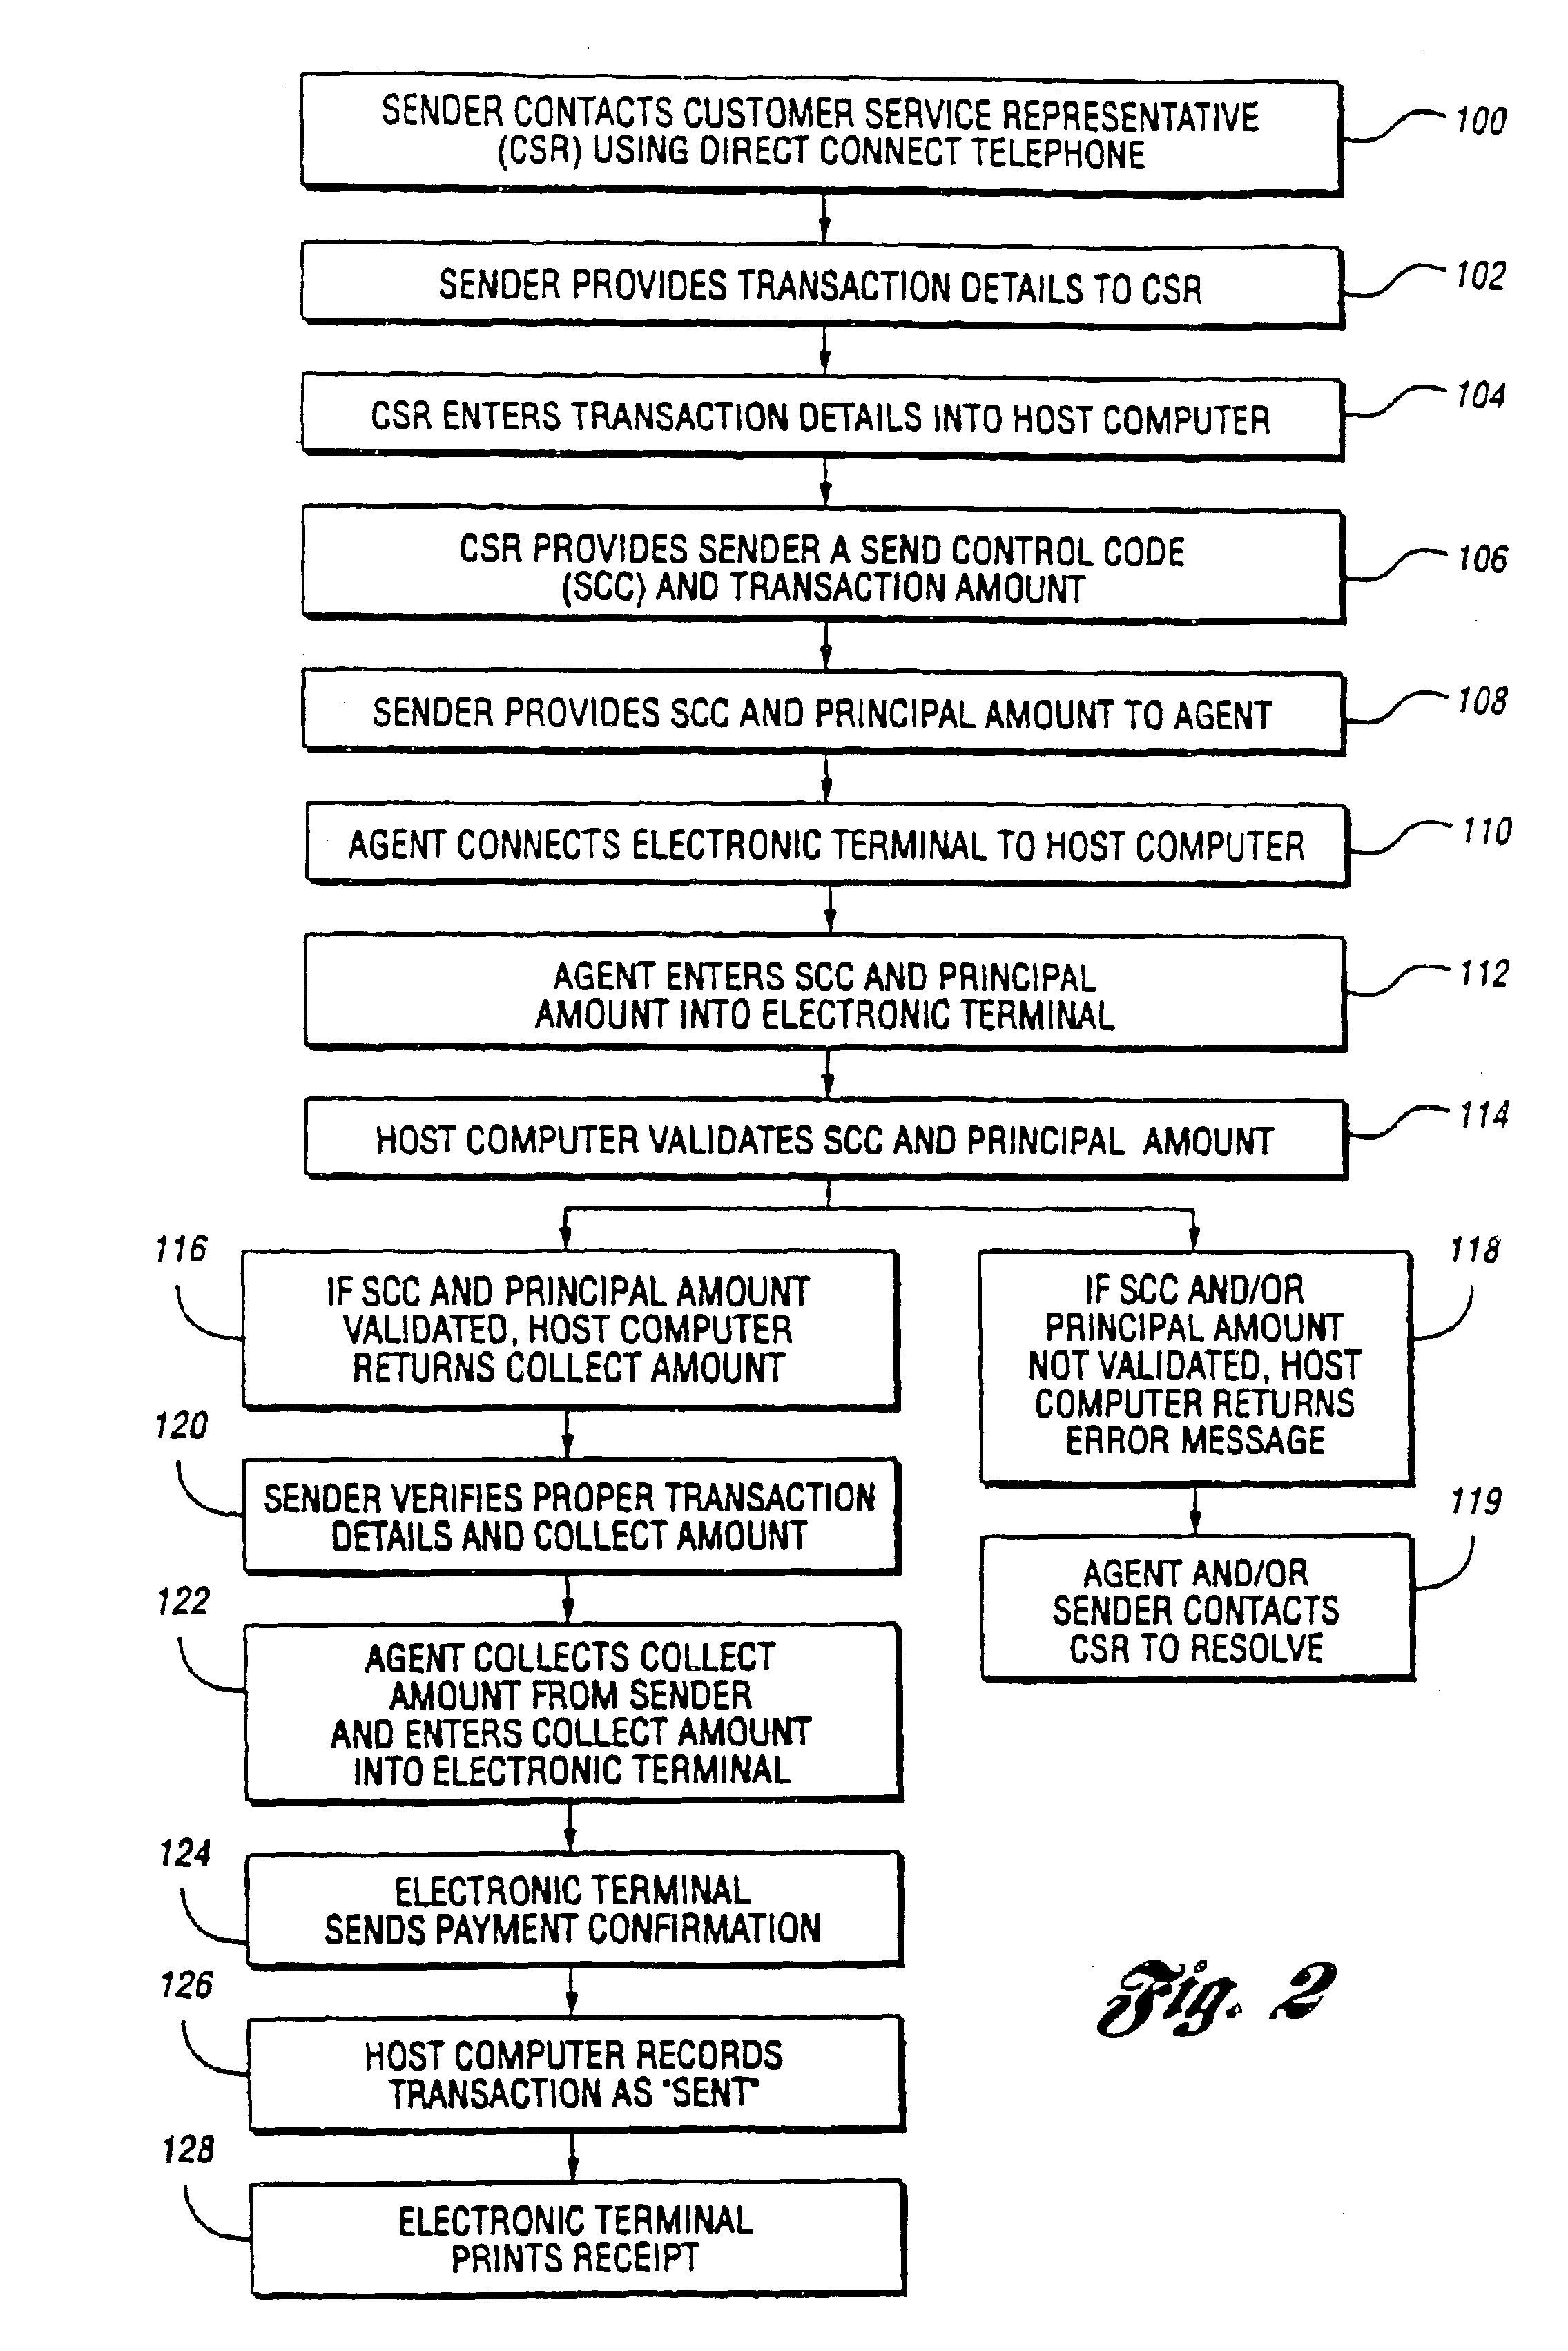 Systems and methods for price matching on funds transfers